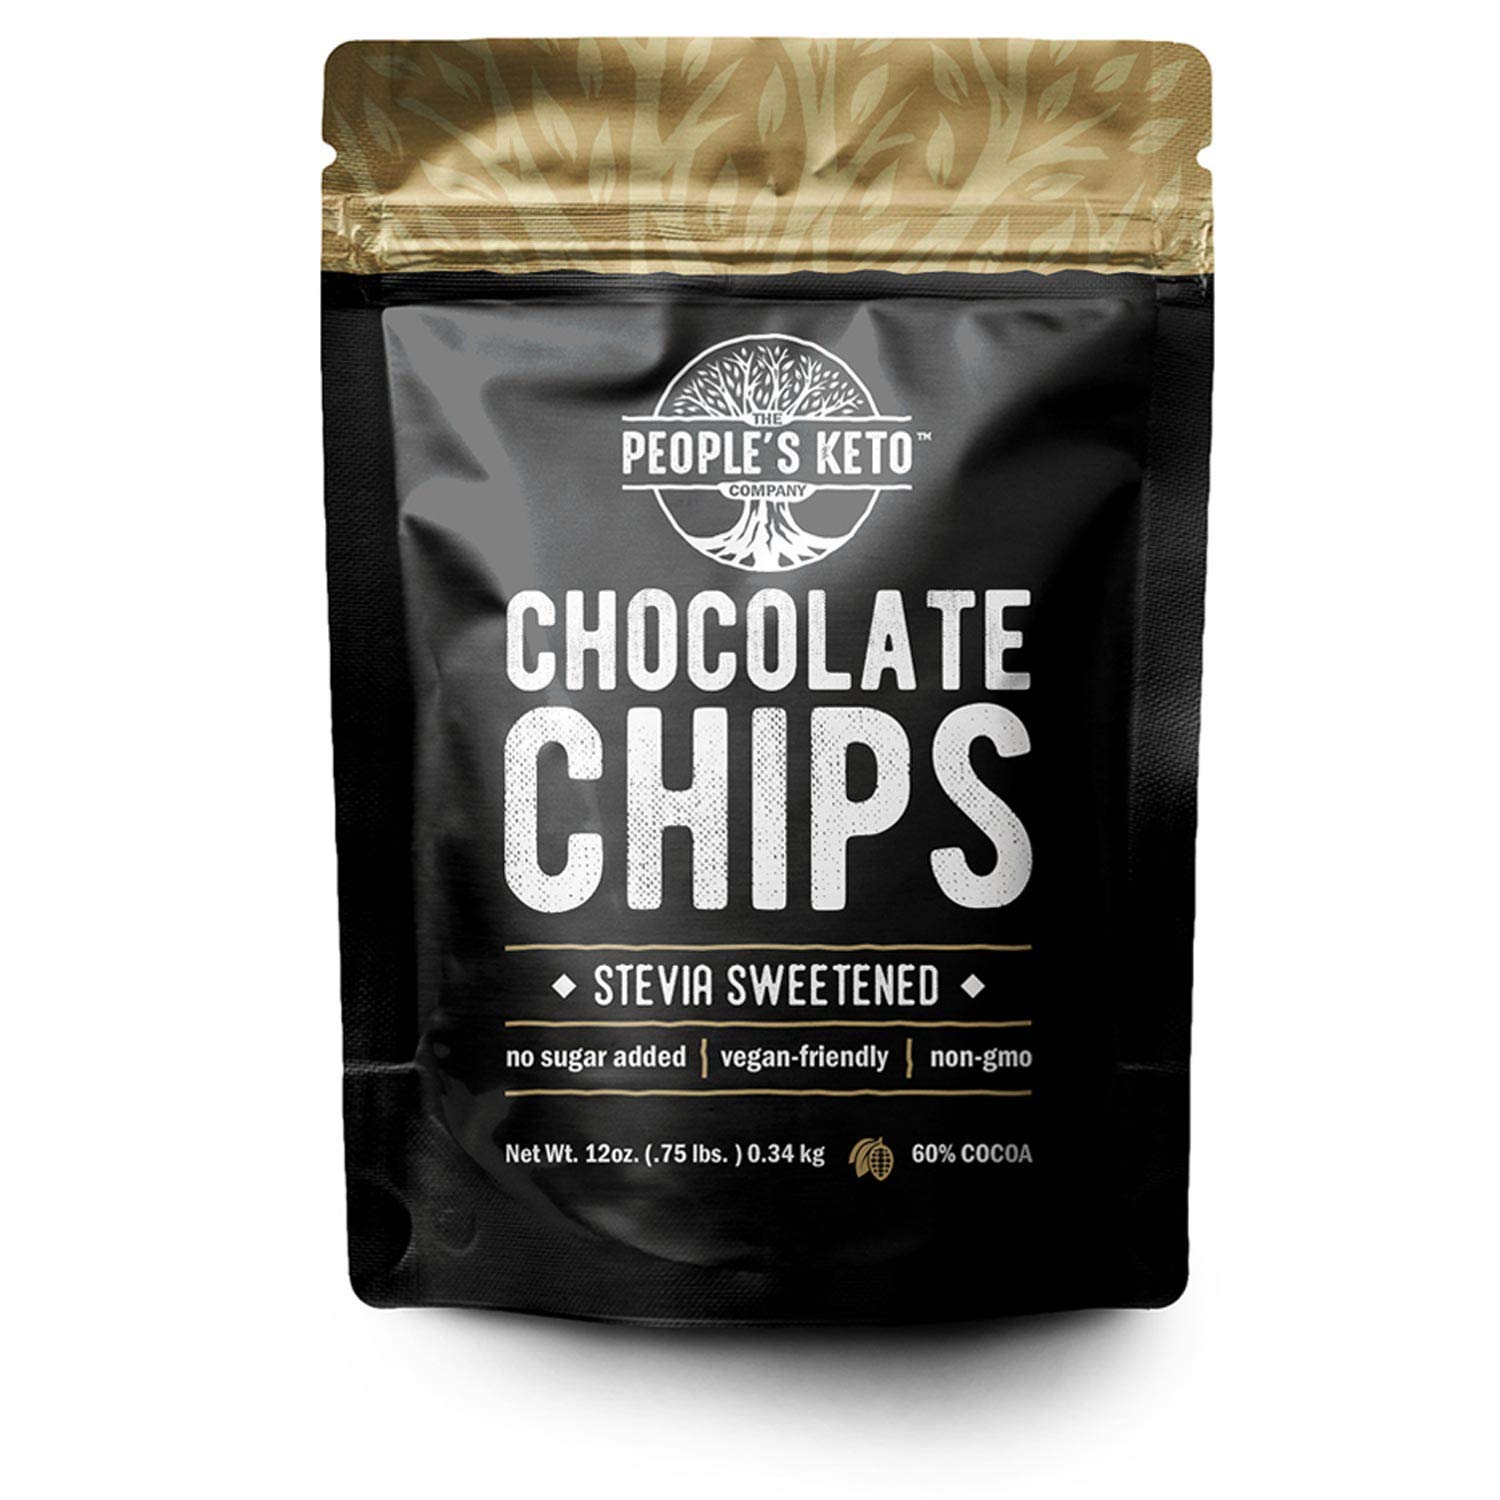 People's Keto Chocolate Chips